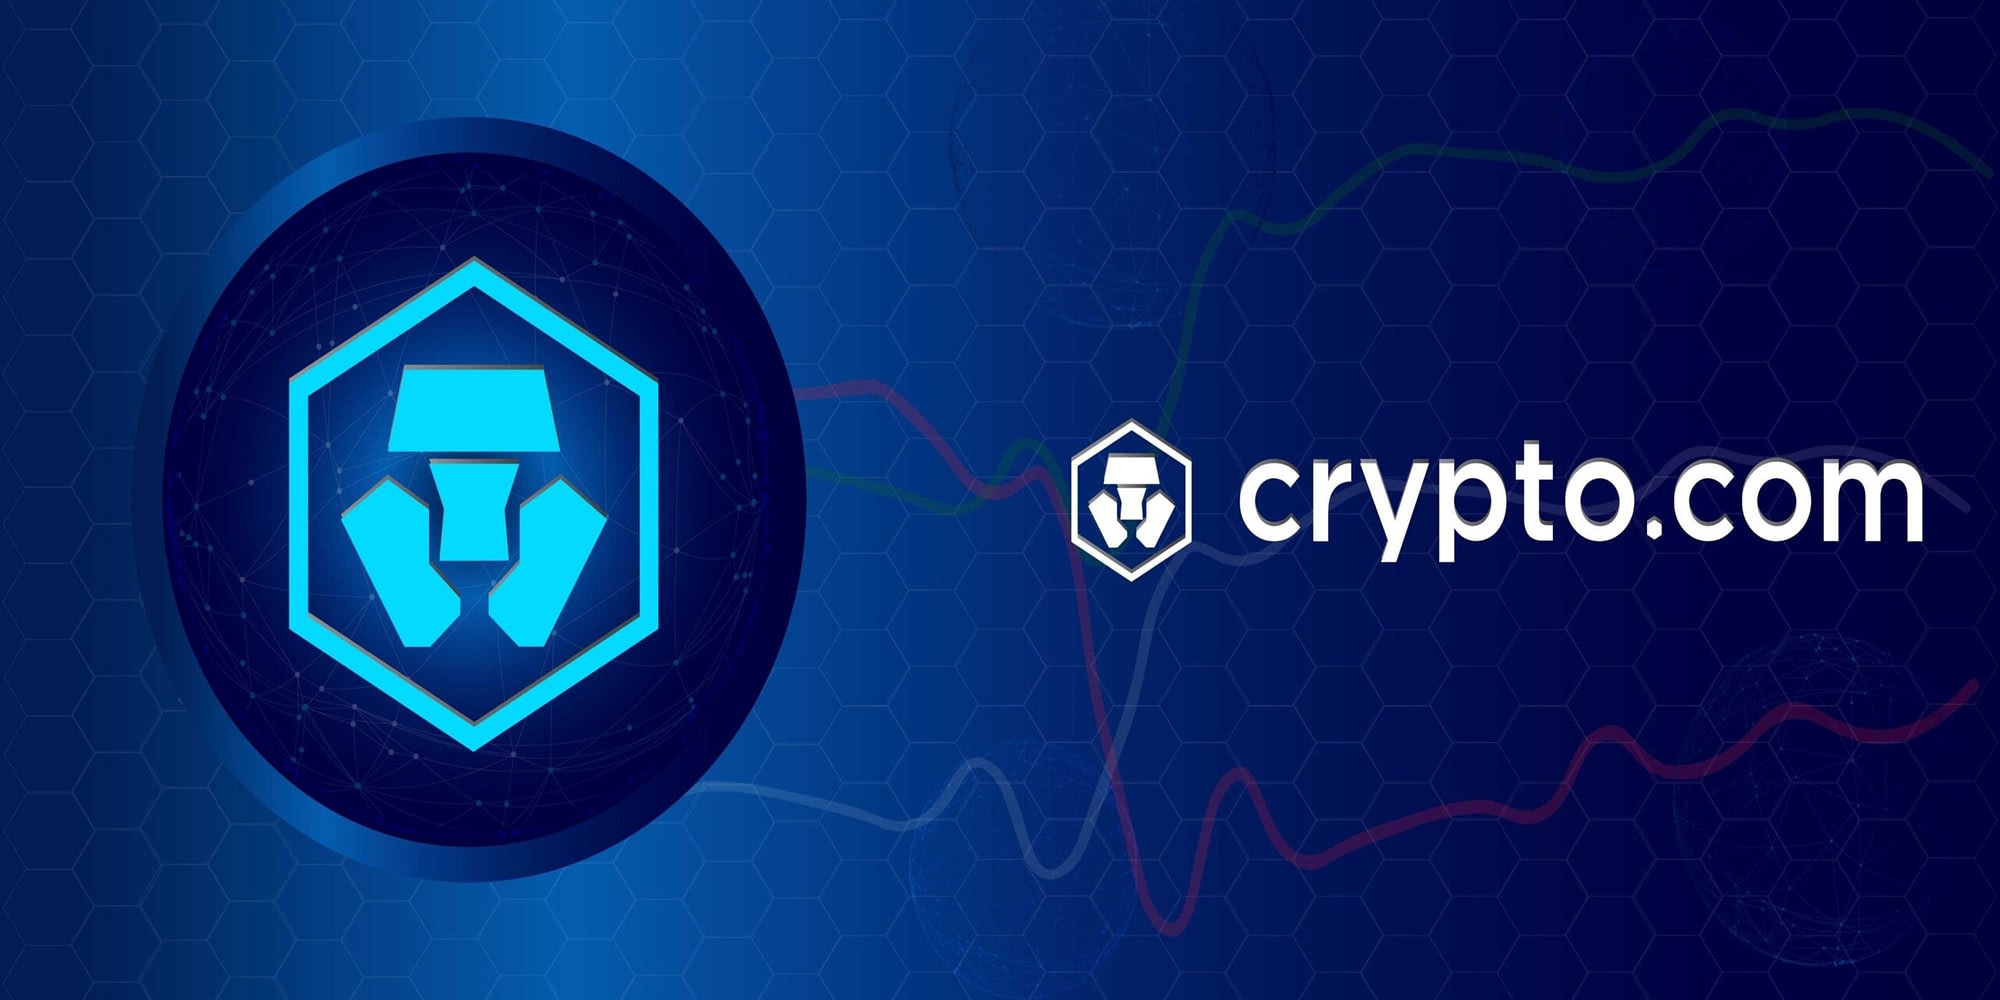 CRO is up by 5% as Cronos’ mainnet upgrade draws closer